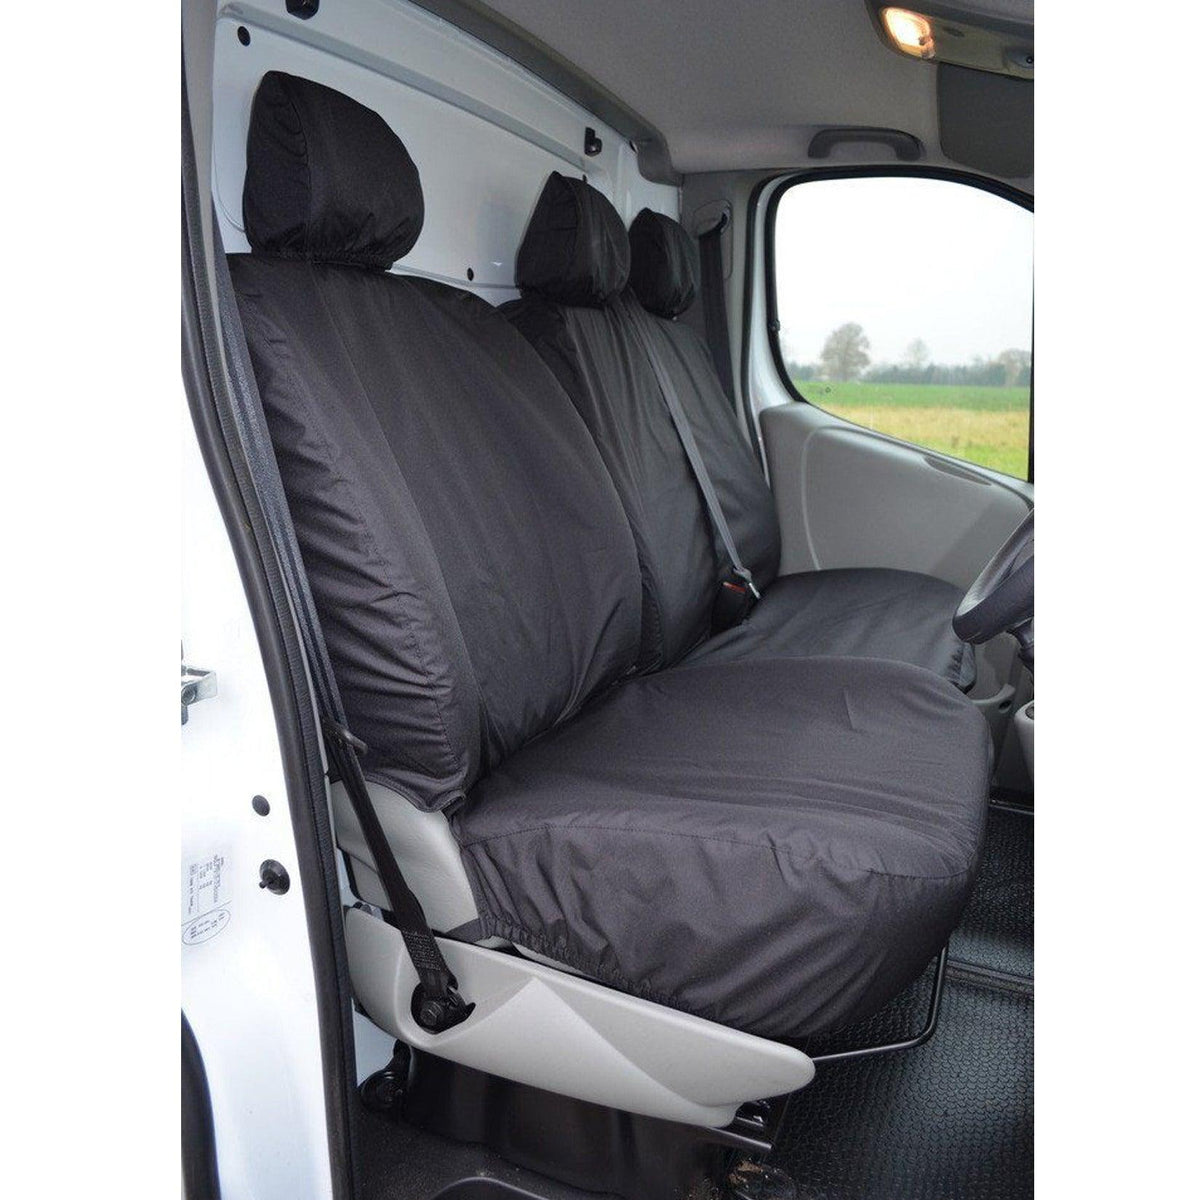 VAUXHALL VIVARO 2006-2014 DRIVER AND FRONT DOUBLE PASSENGER SEAT COVERS - BLACK - Storm Xccessories2